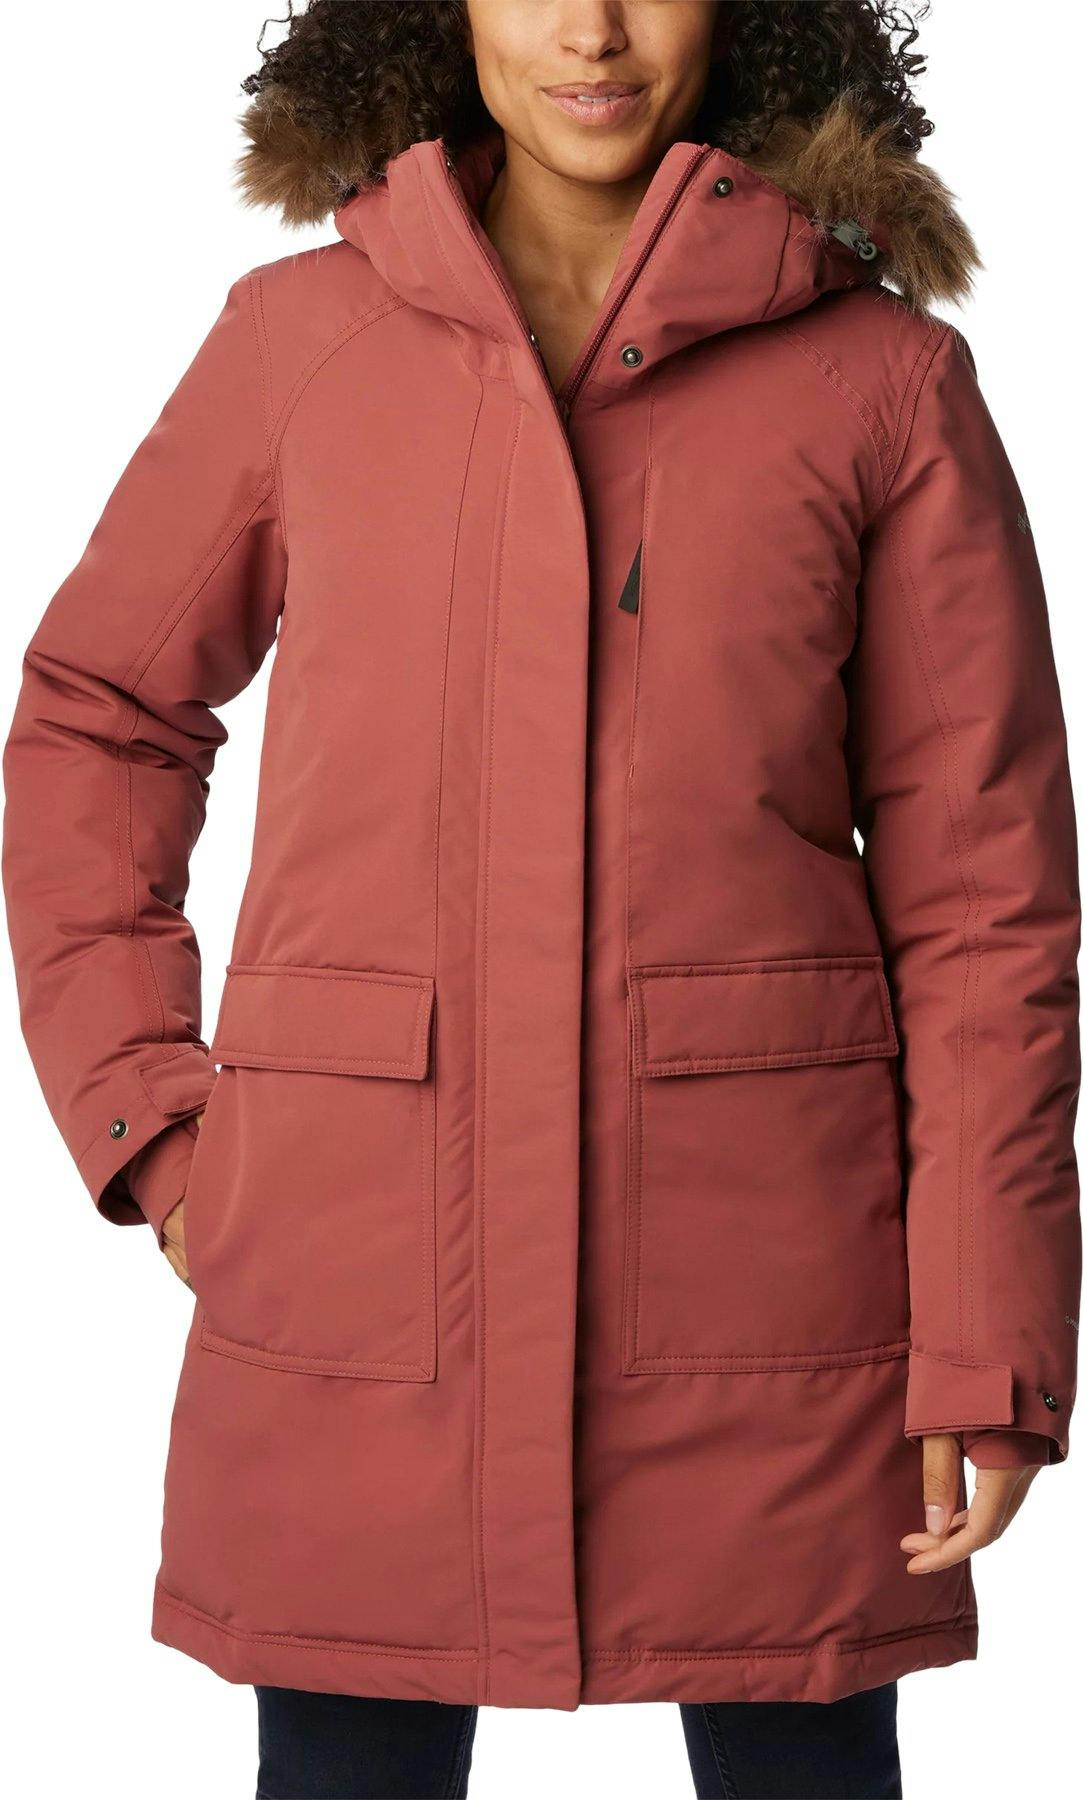 Product image for Little Si Insulated Parka - Women's